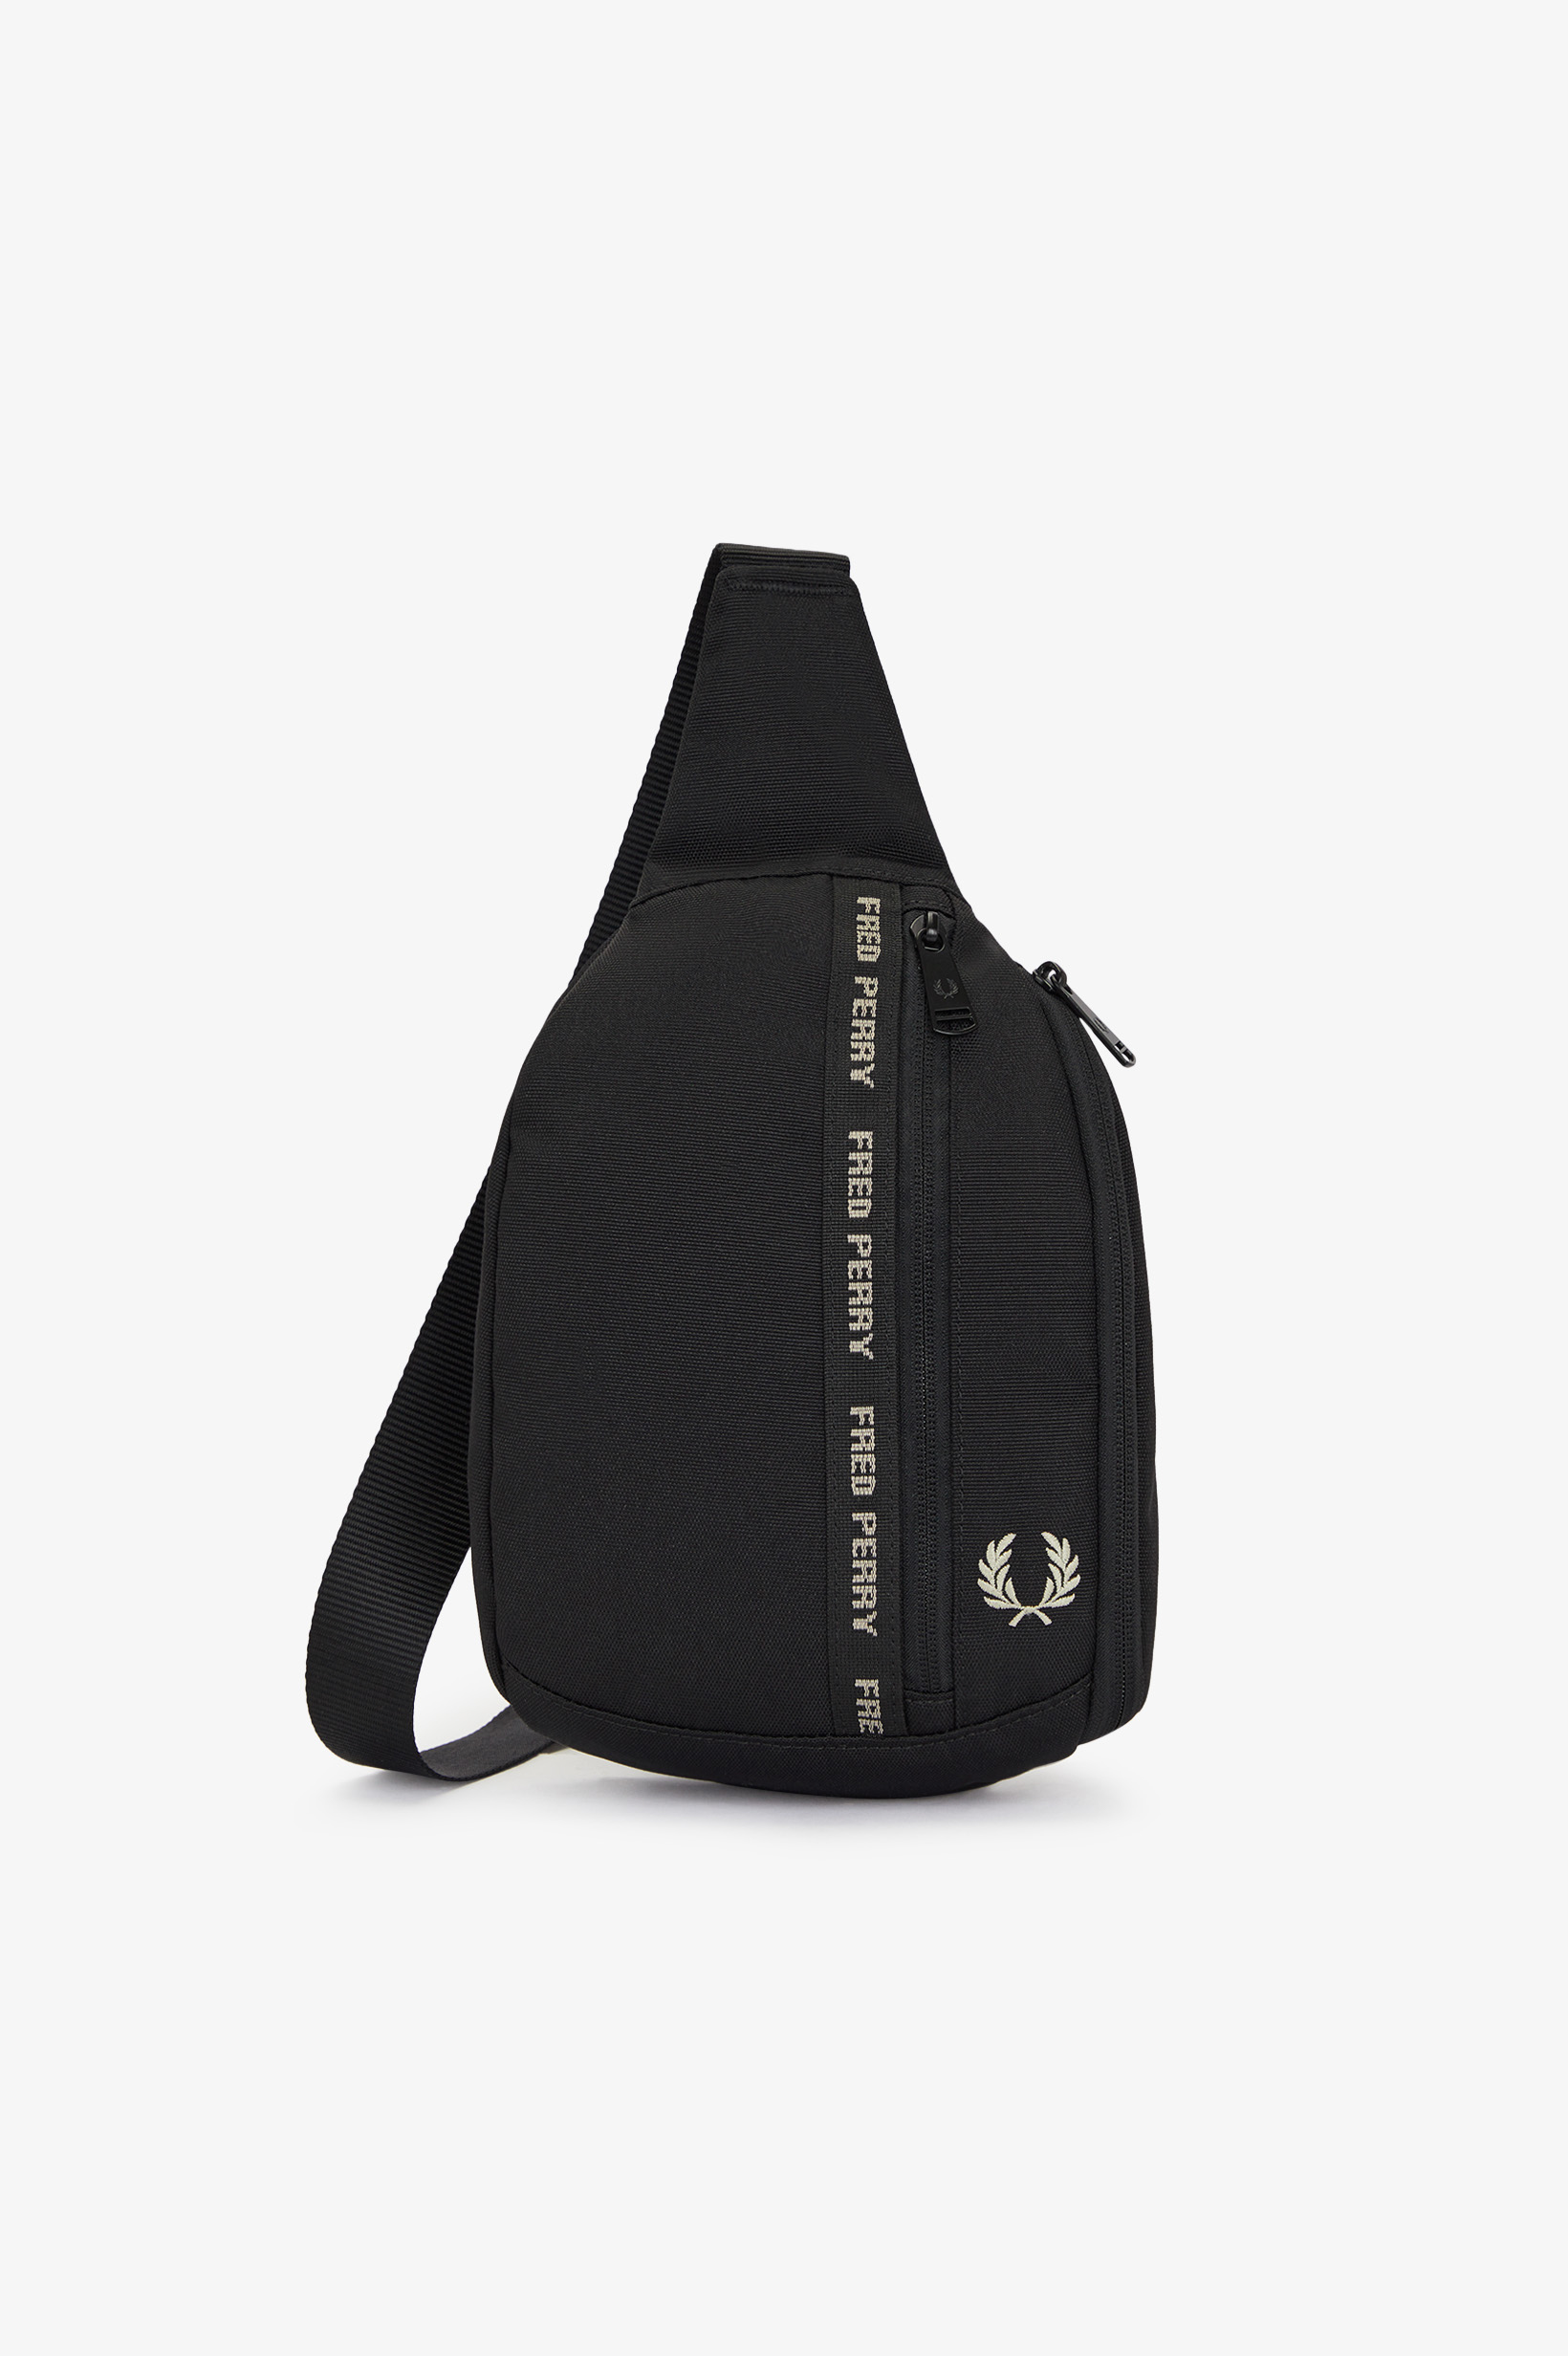 Fred Perry - FP TAPED SLING BAG - Black/Warm Grey 